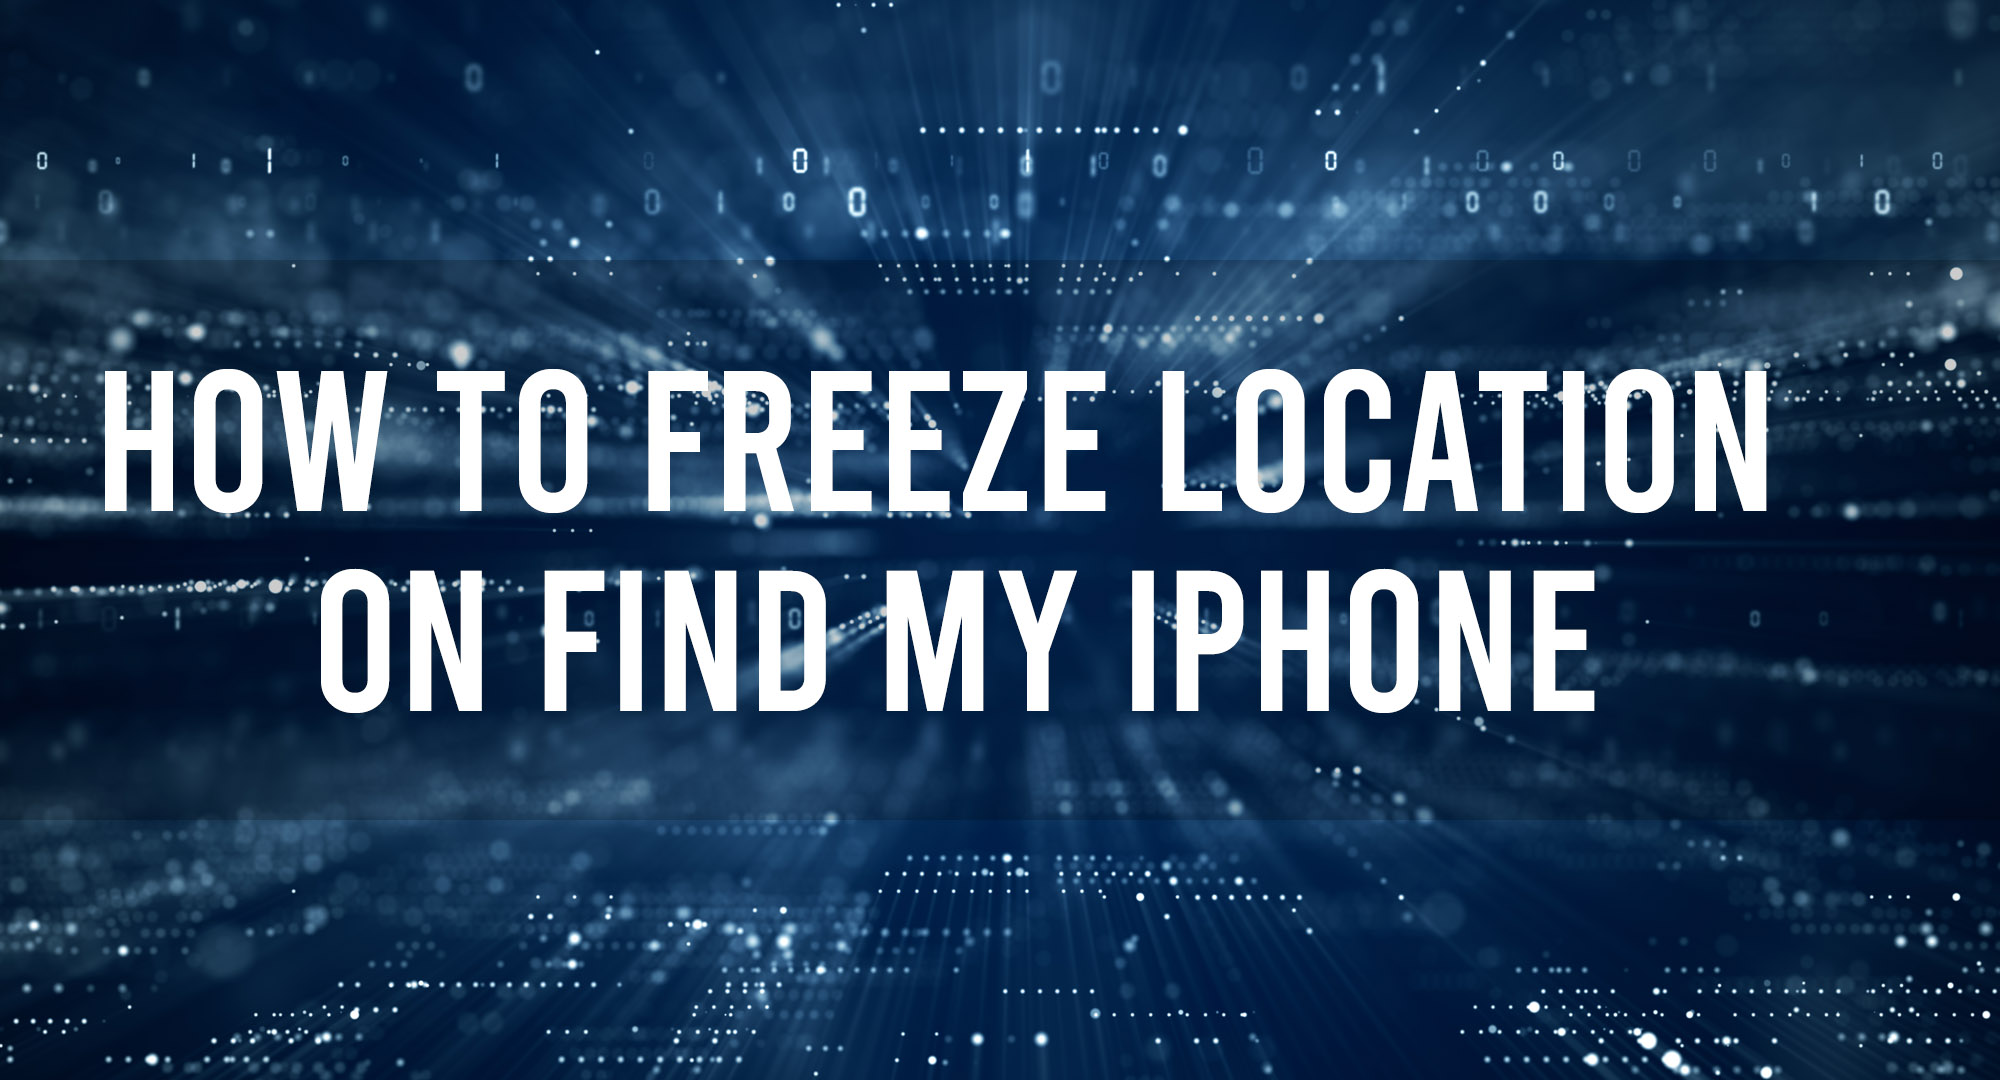 How to freeze location on find my phone